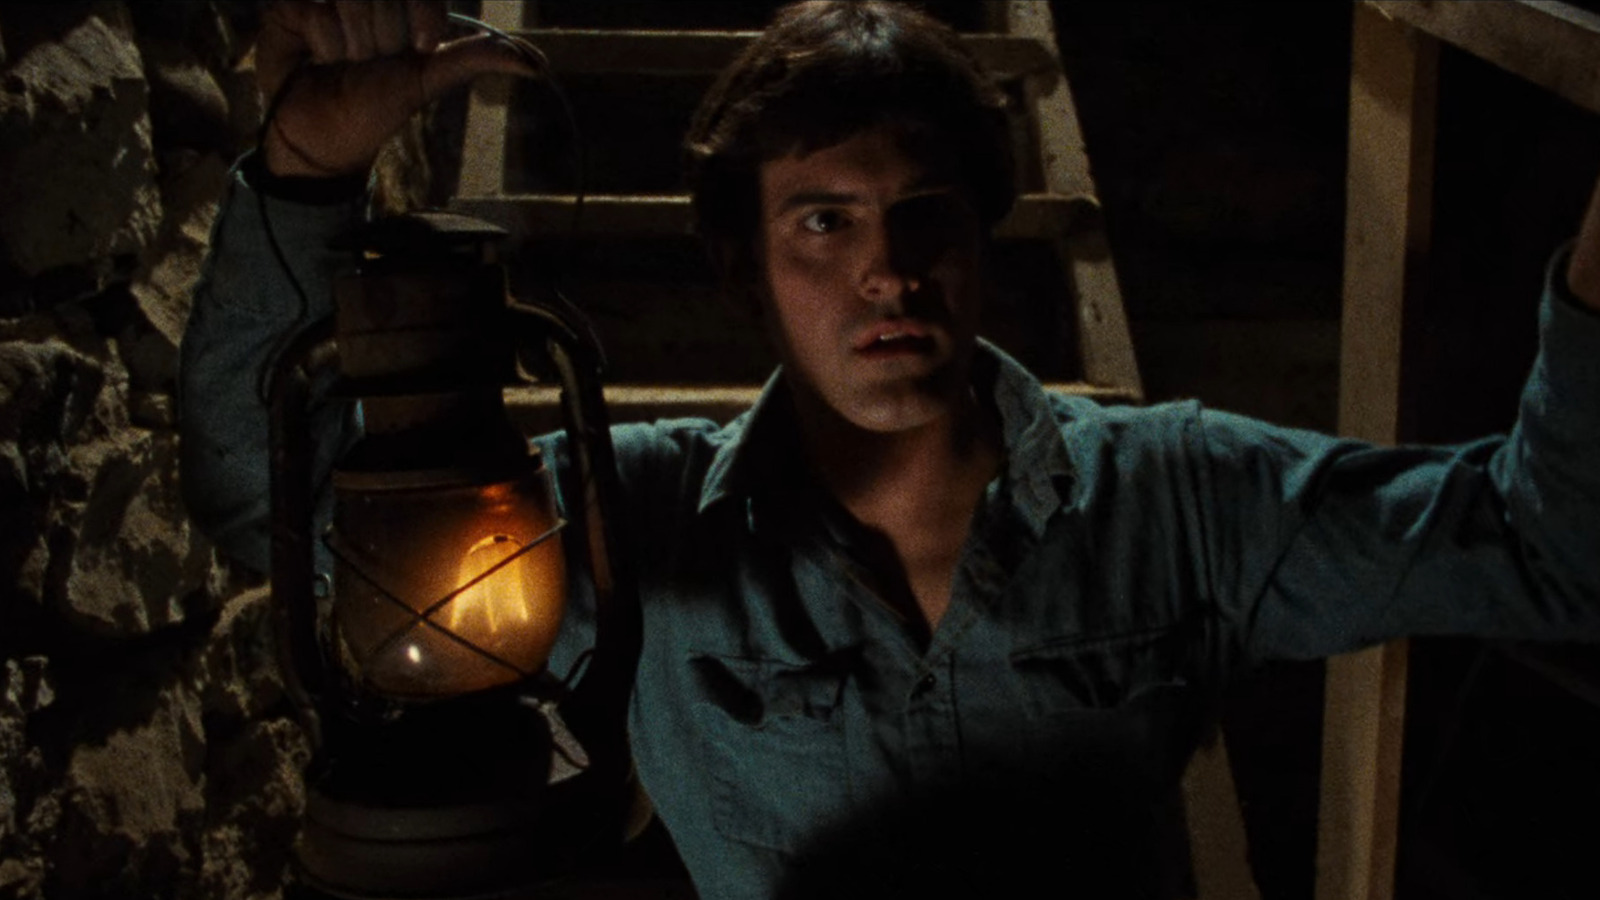 Evil Dead, The (1981)